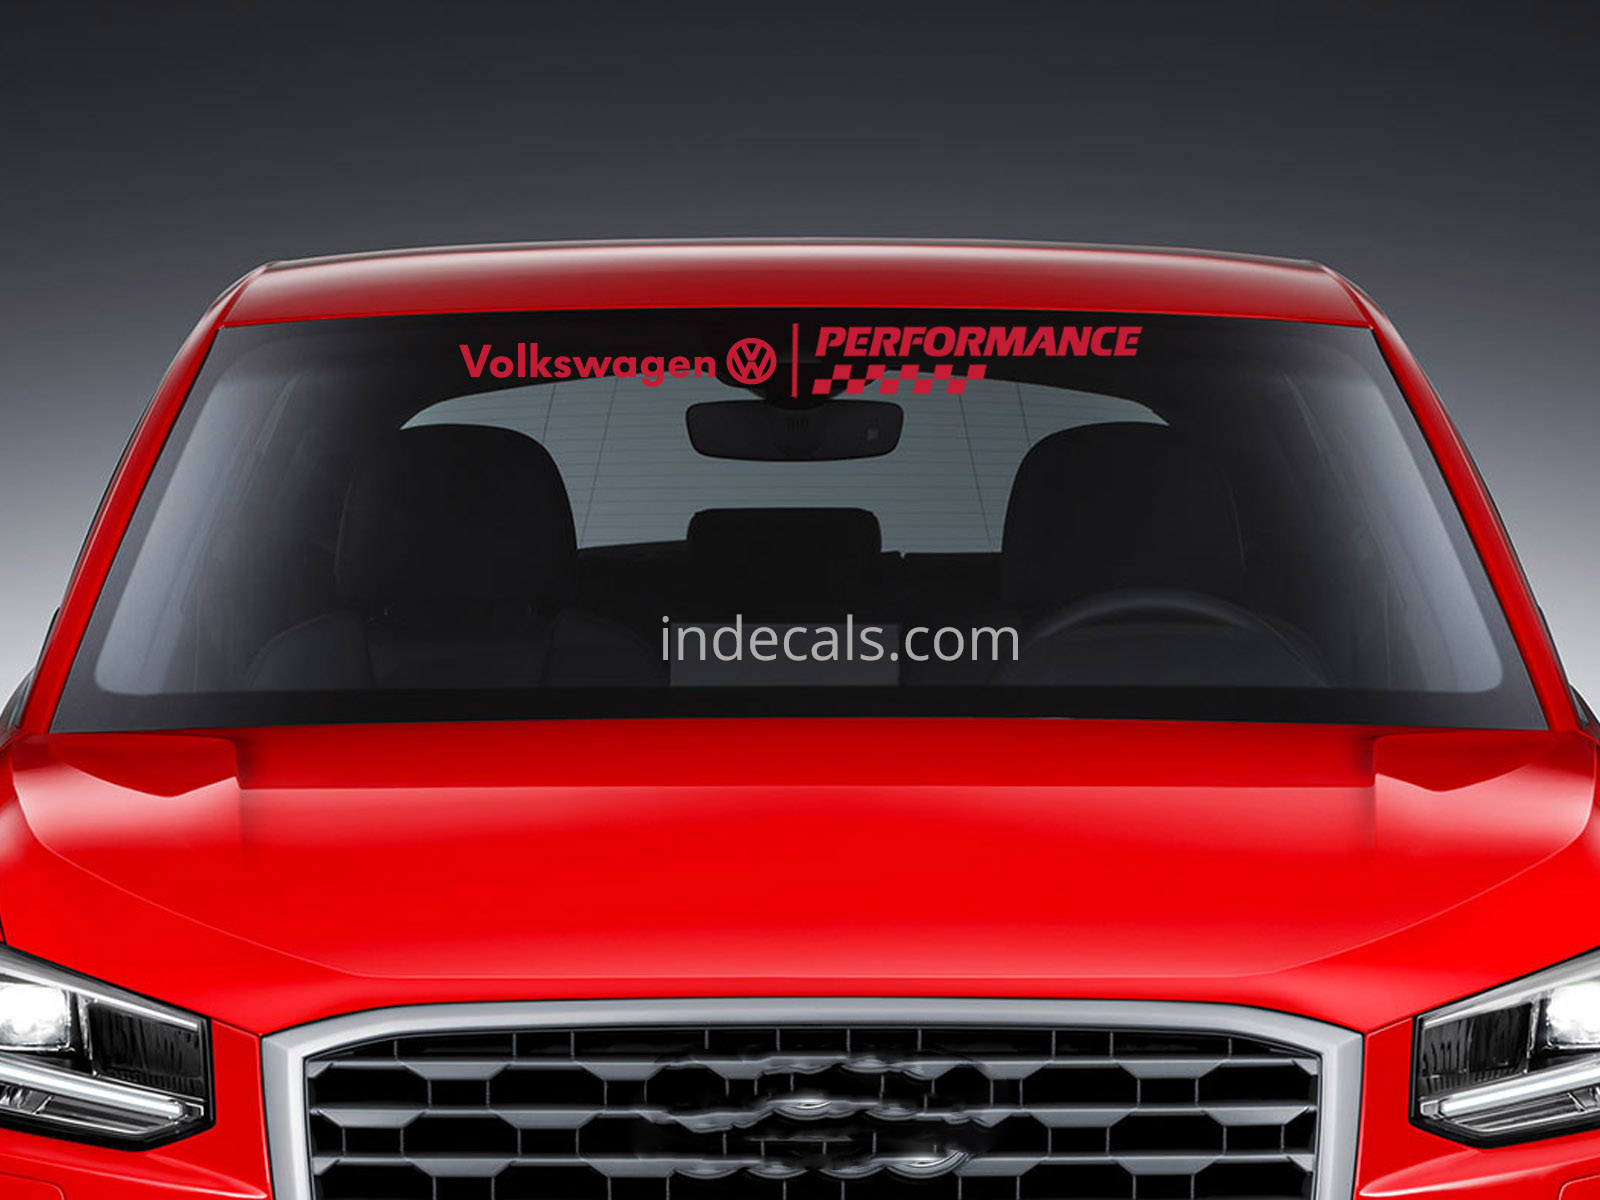 1 x Volkswagen Performance Sticker for Windshield or Back Window - Red